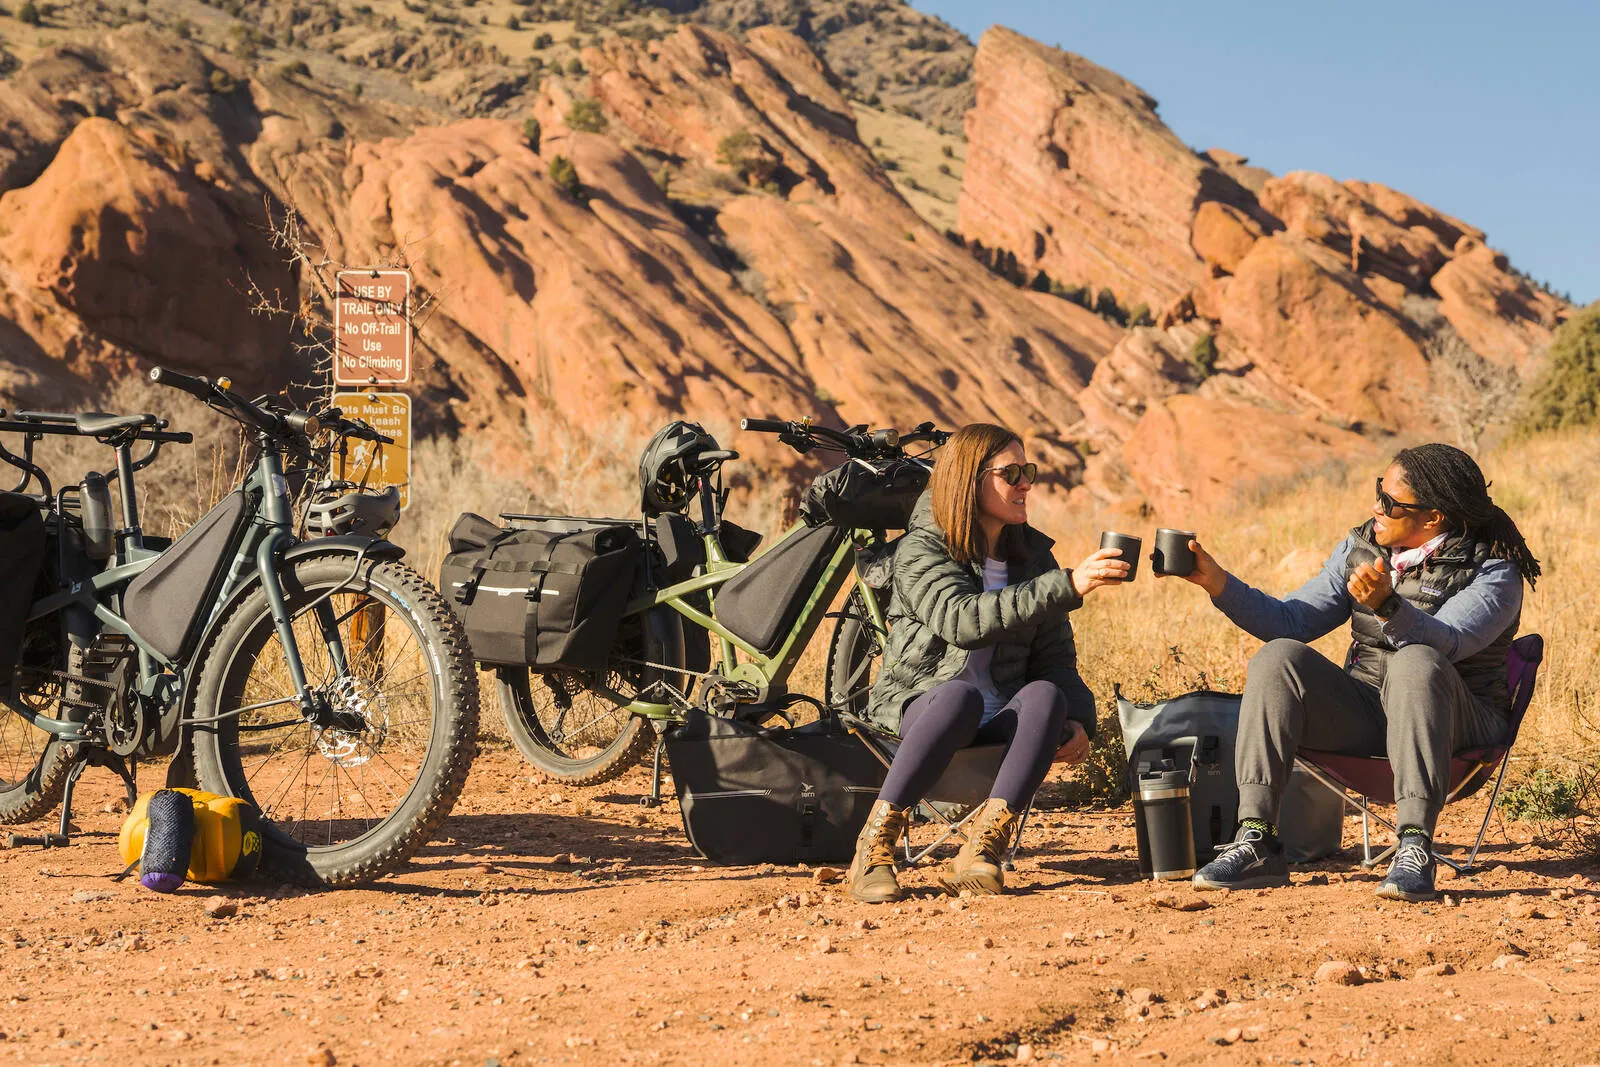 Two people in a desert scene sat next to their Tern Orox bikes